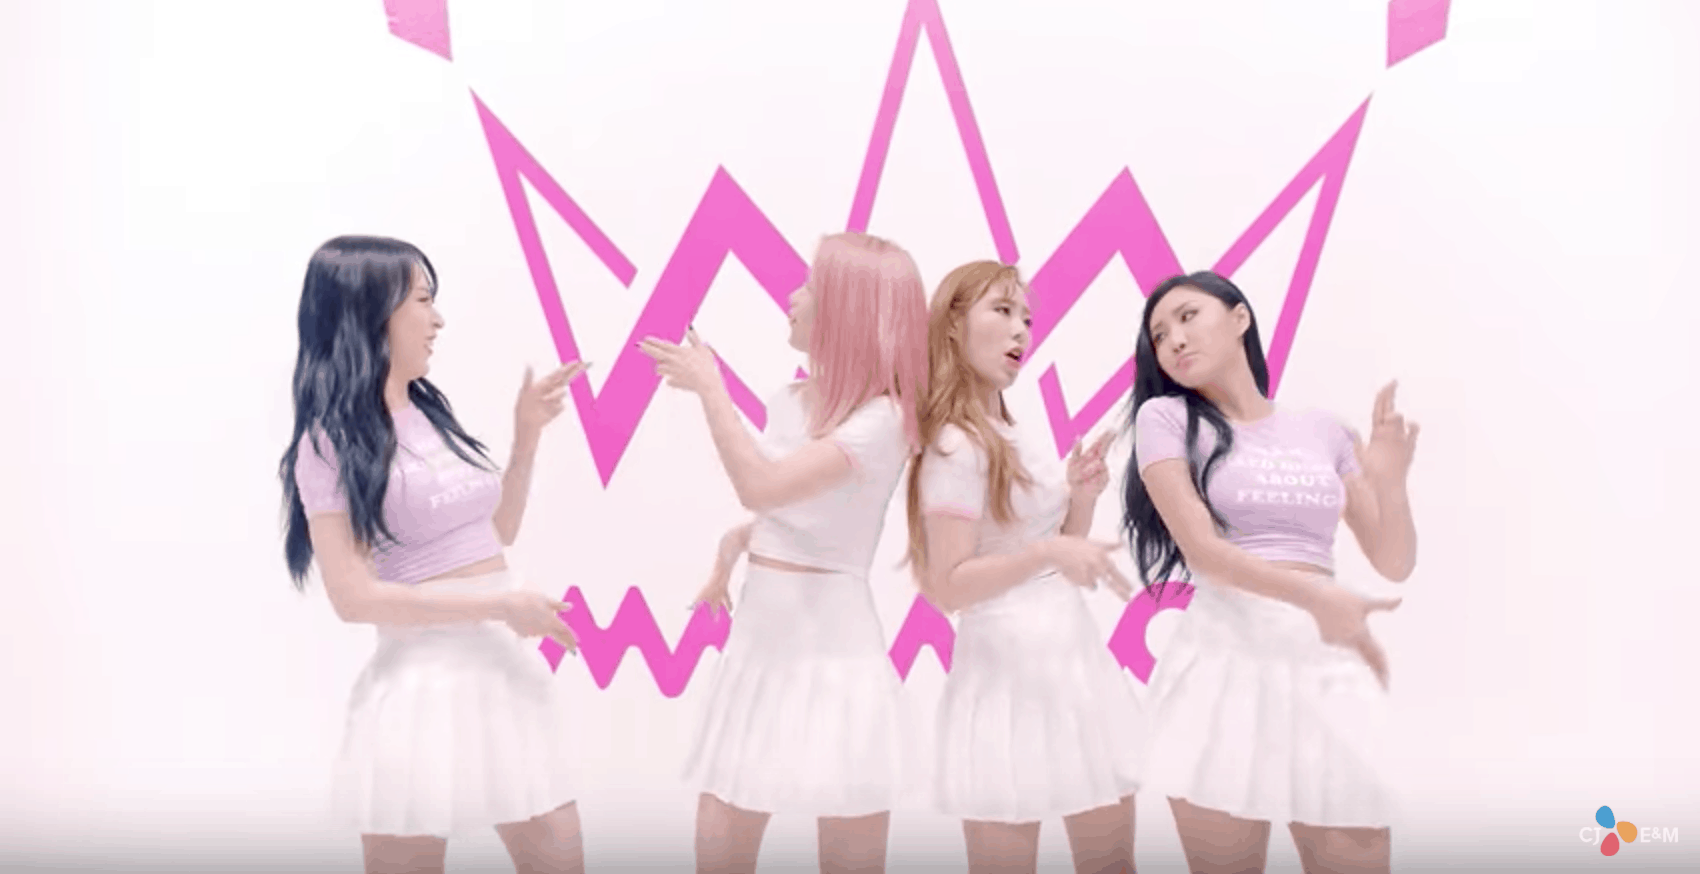 Mamamoo Yes I Am fashion: The girls wear pink and purple tops with white skirts in front of a pink background in the music video